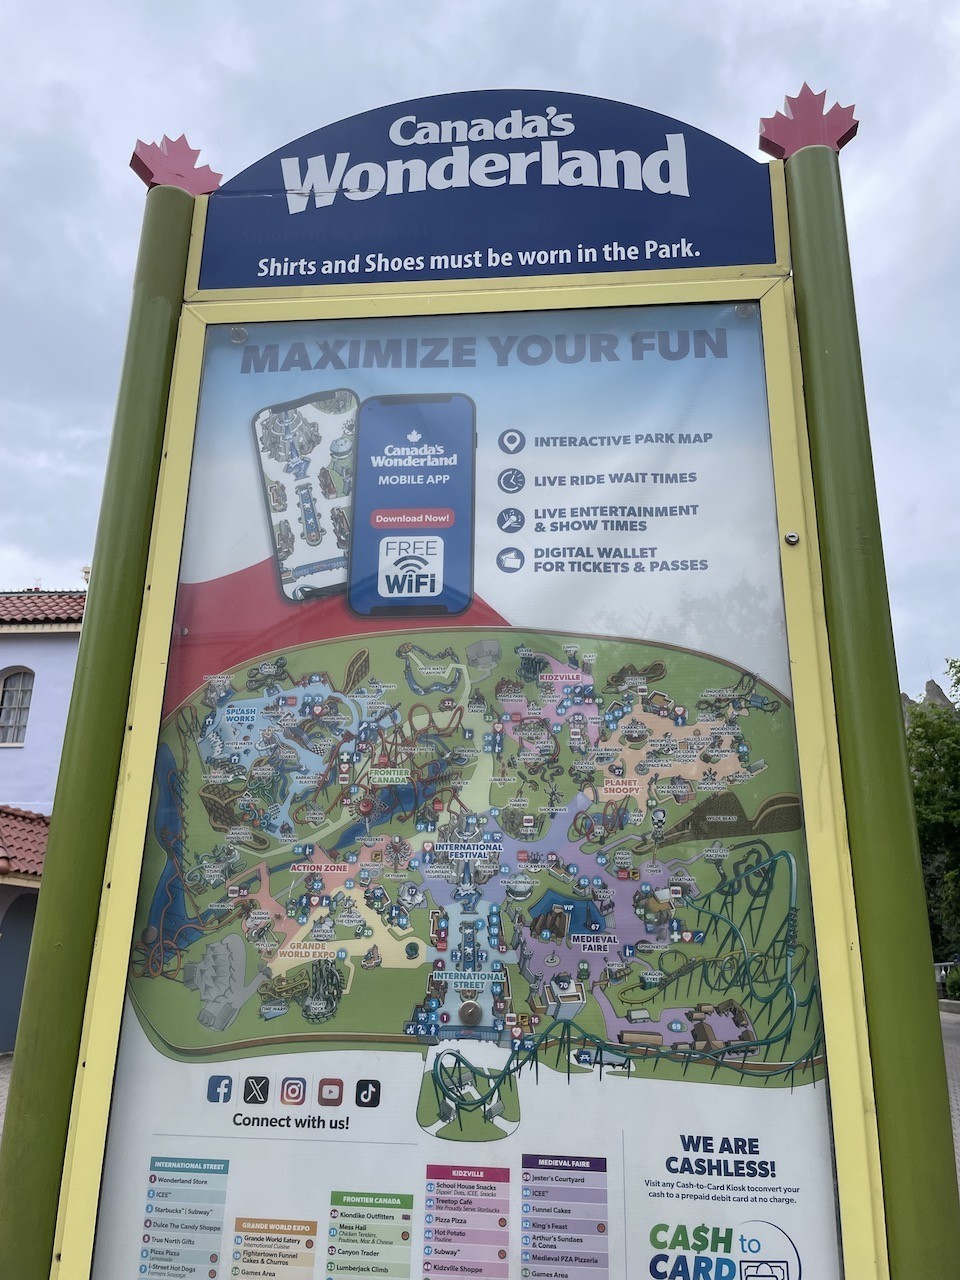 Canada's Wonderland Map Vaughan Ontario Canada - In addition to large maps throughout the park, Canada's Wonderland also offers an app to download and use at the park. There is a detailed map in the app that provides ride line time updates to help you as you plan your schedule for the day.